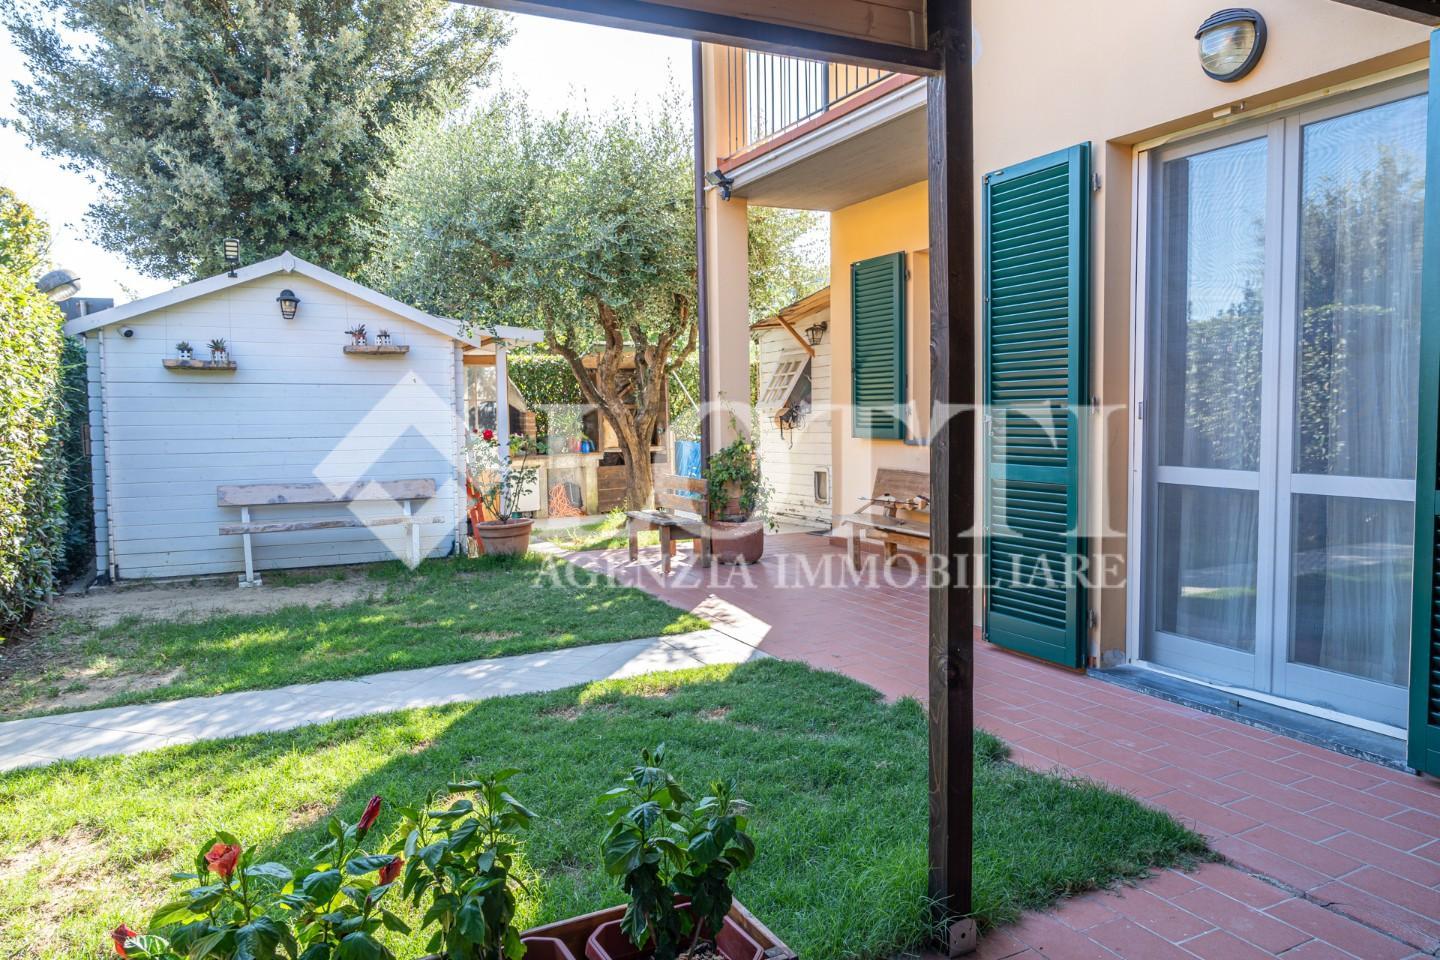 Angular terraced house for sale in Vicopisano (PI)